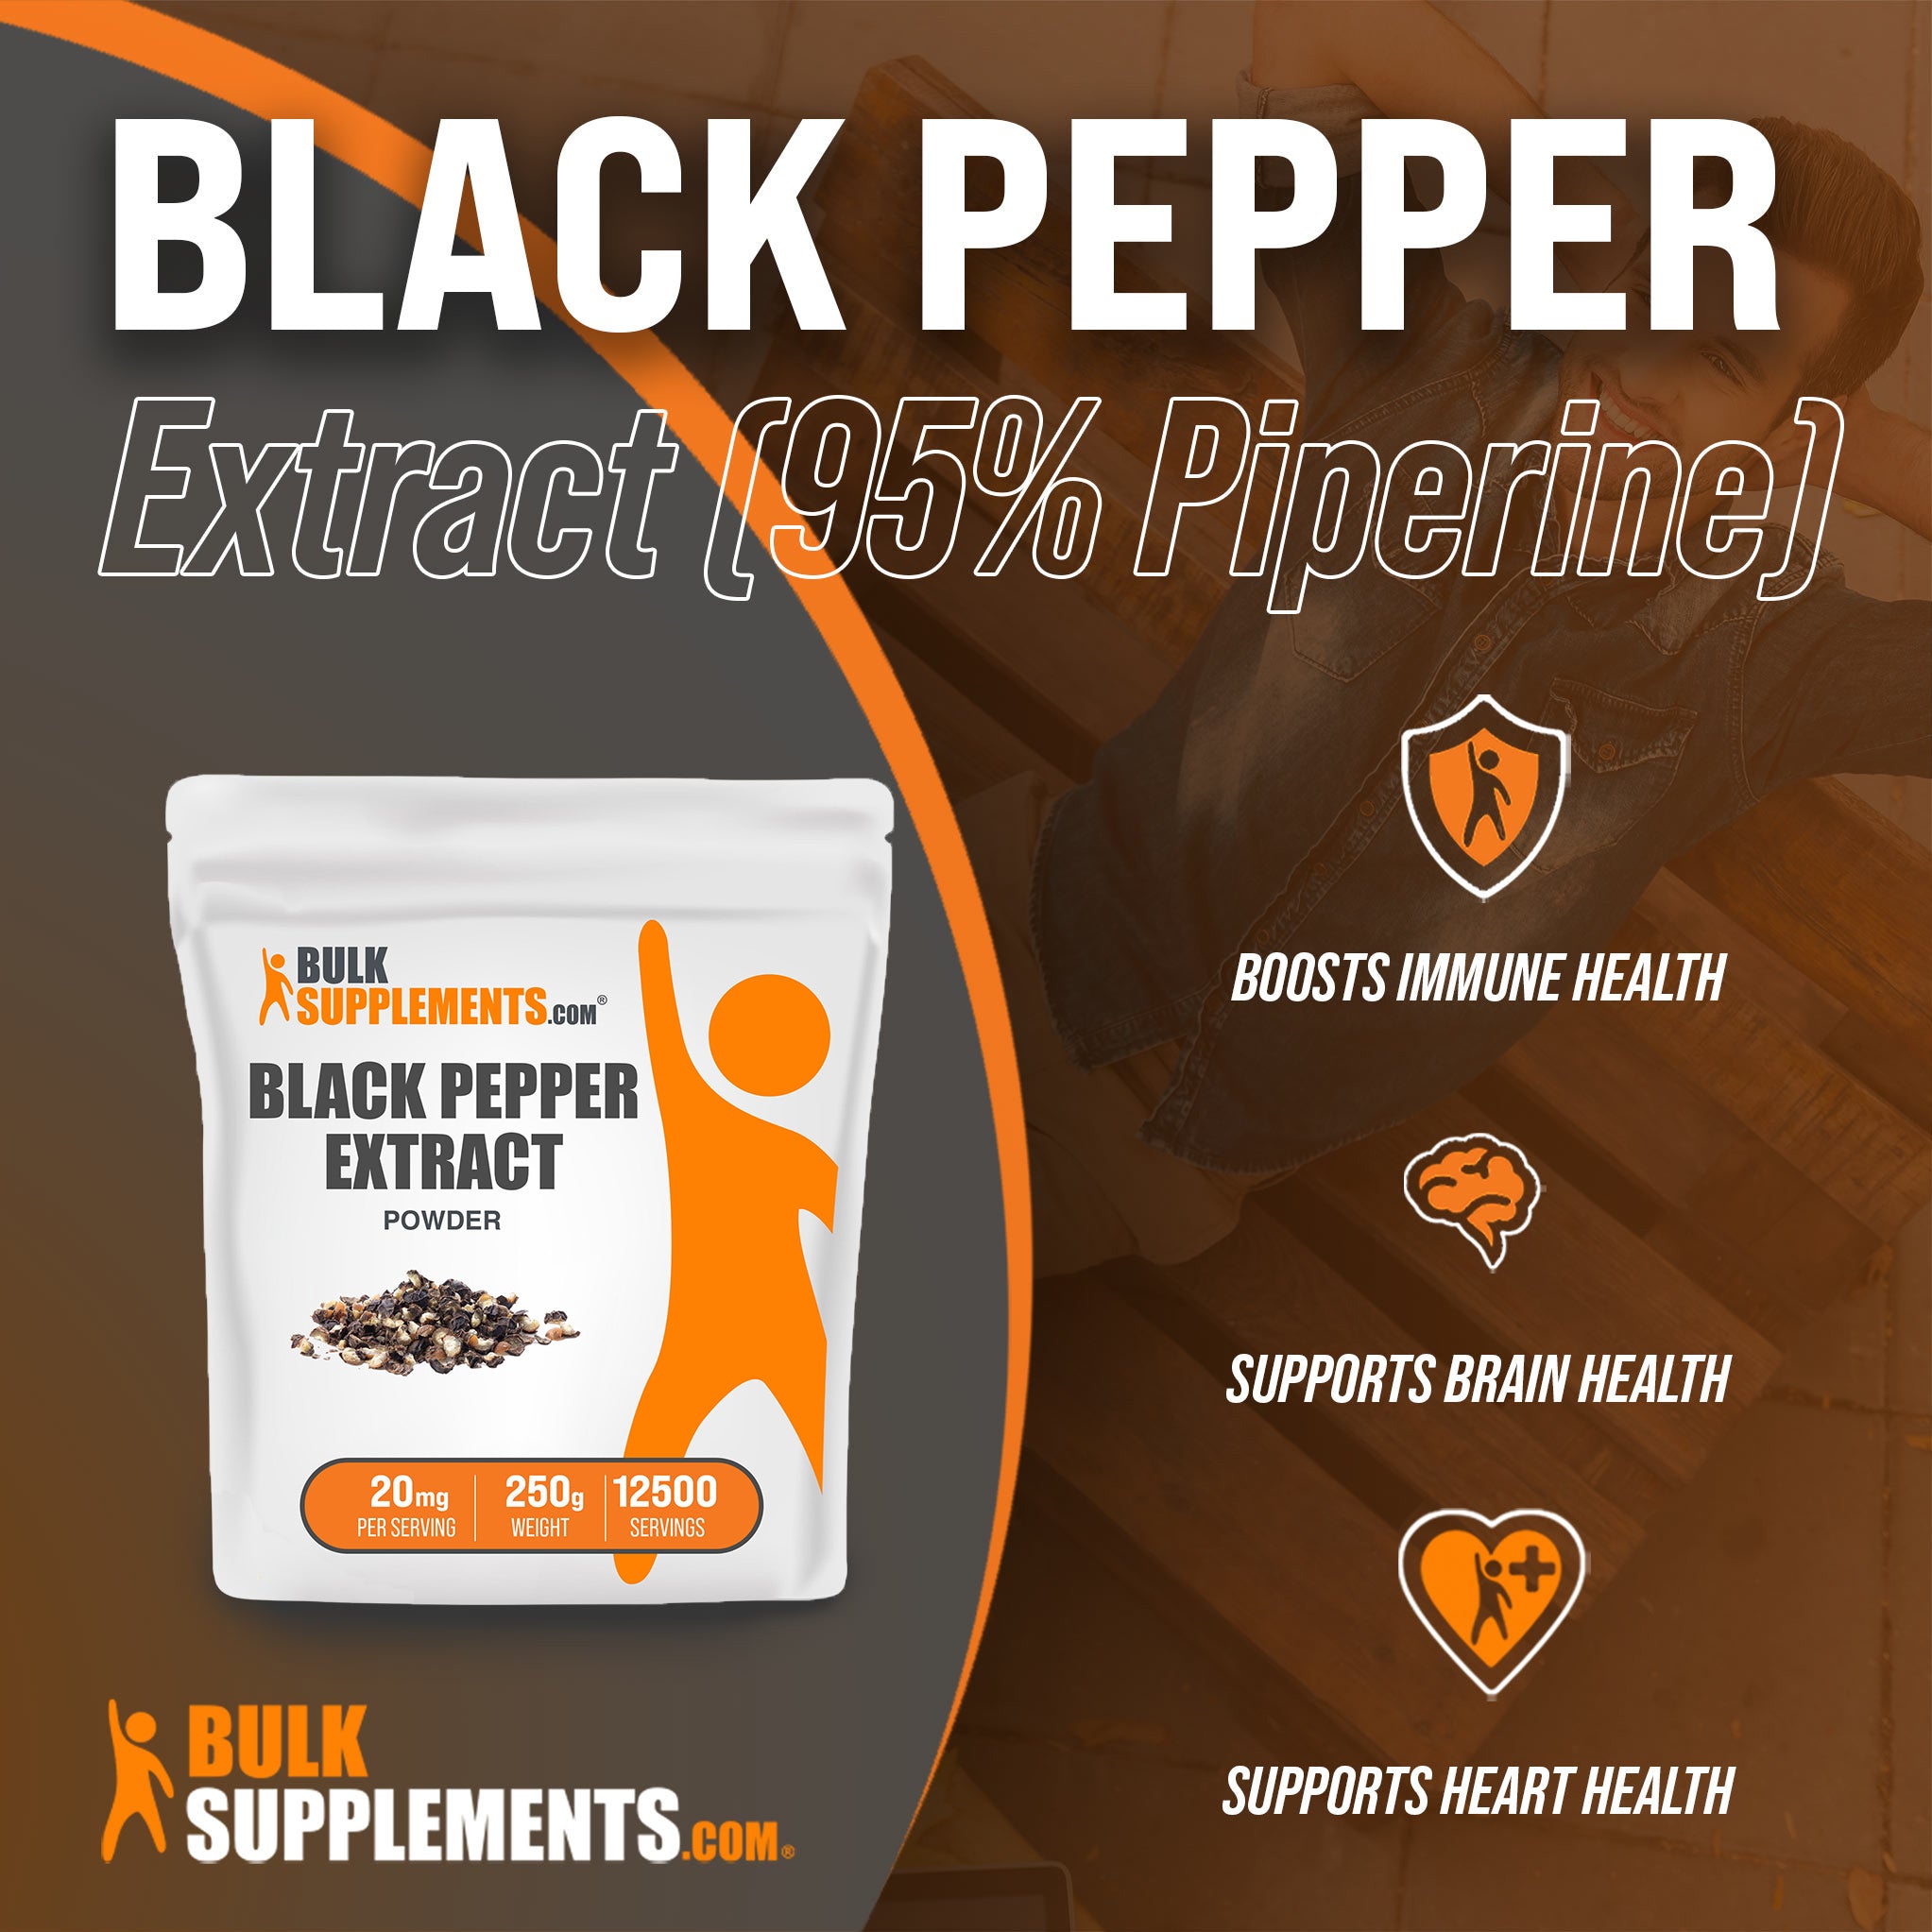 250g bags of black pepper extract are a great source of piperine